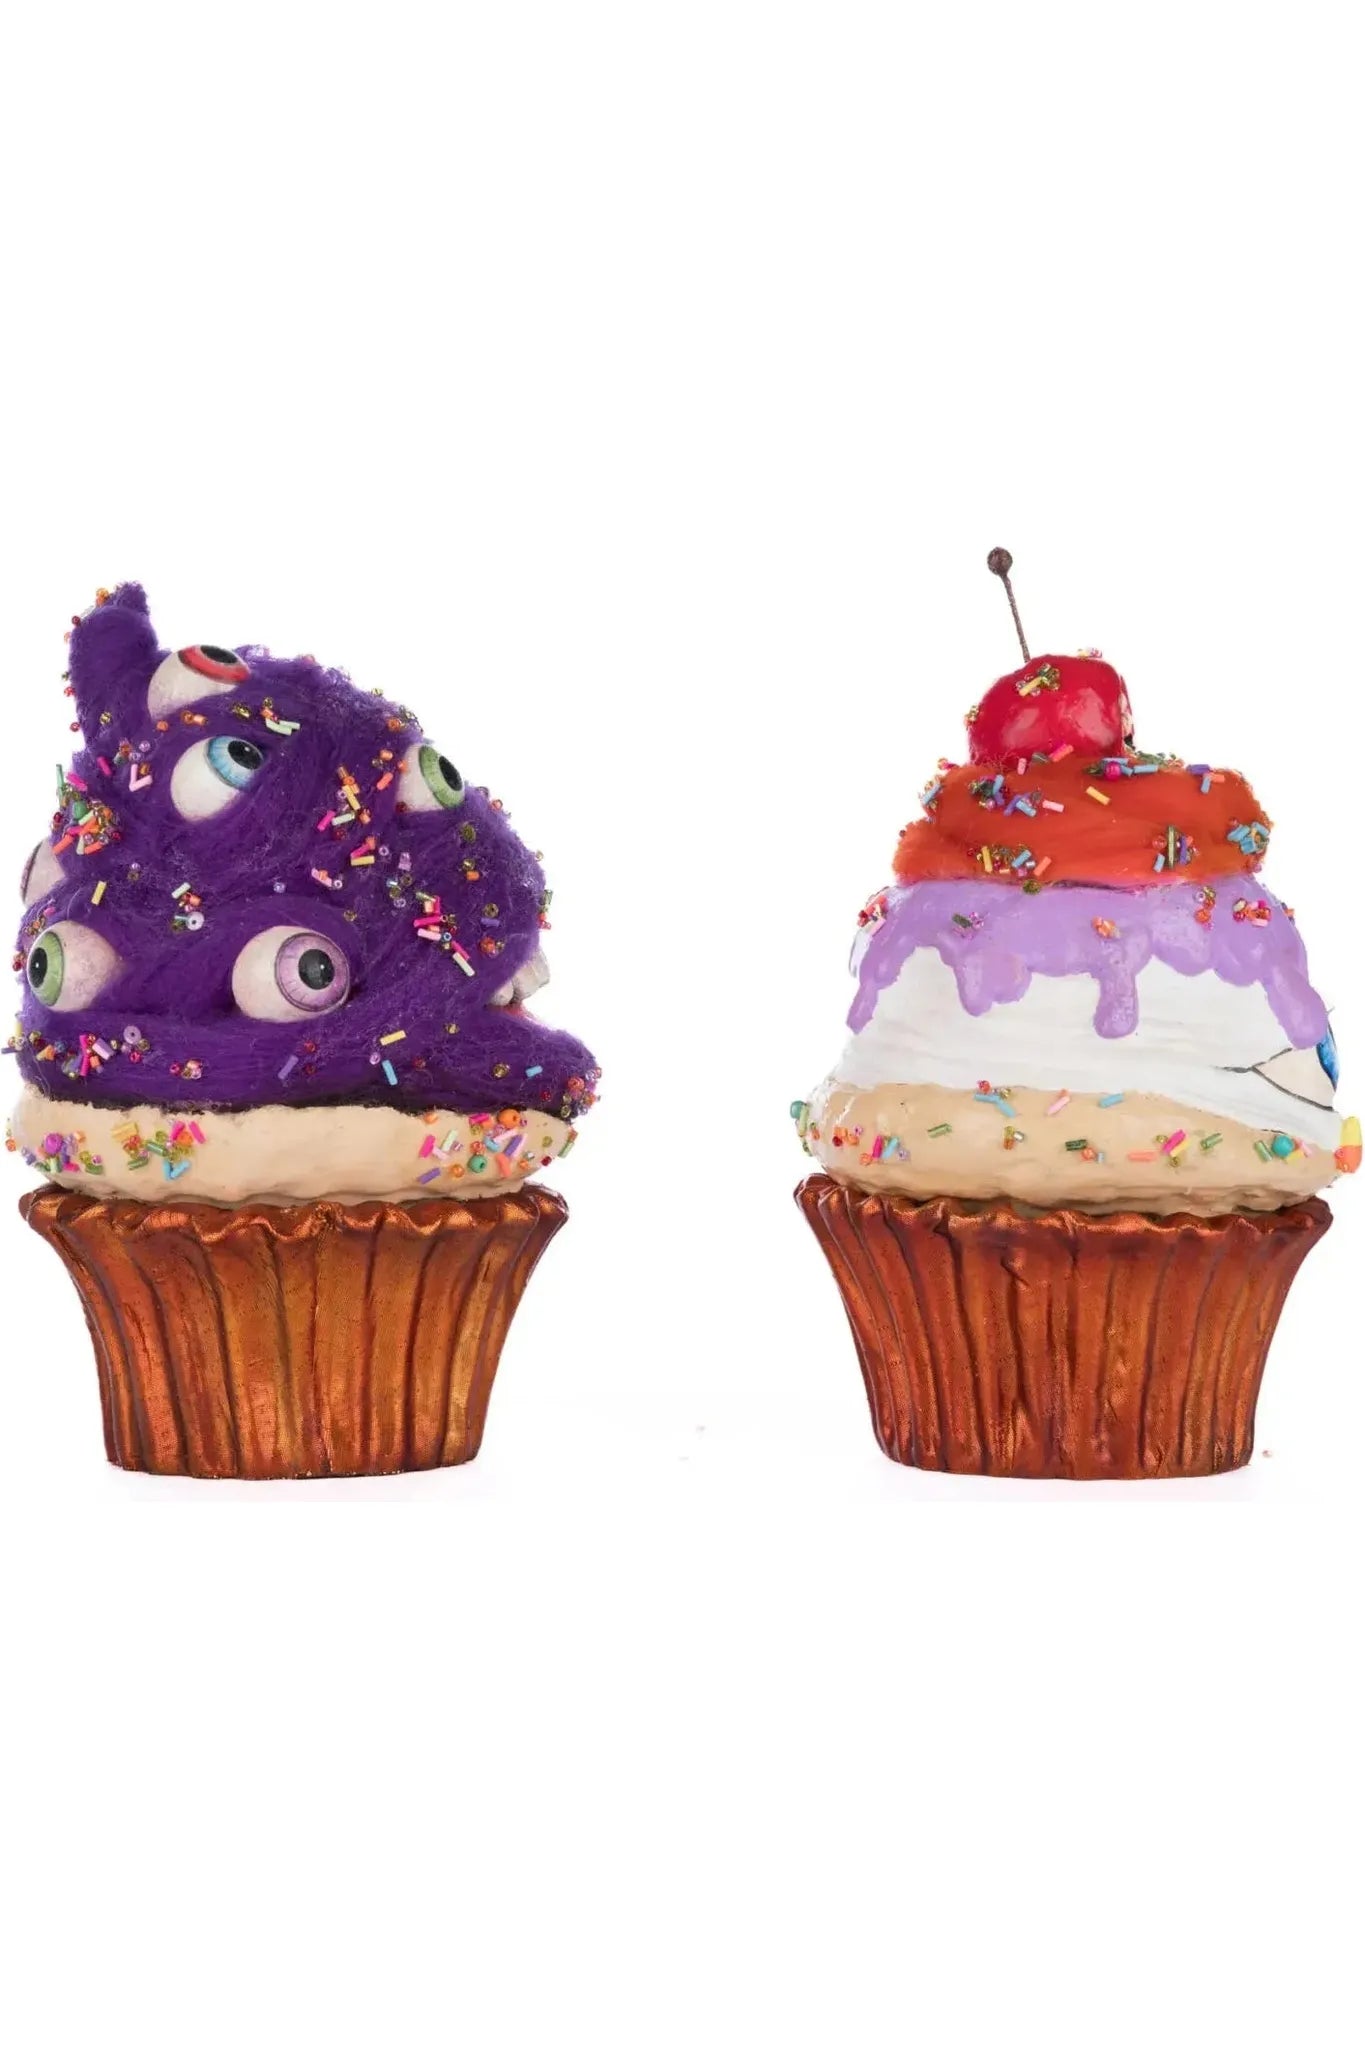 Creepy Cupcakes Crazy Eyes And Crabby Crumbs Assortment of 2 - Michelle's aDOORable Creations - Halloween Decor